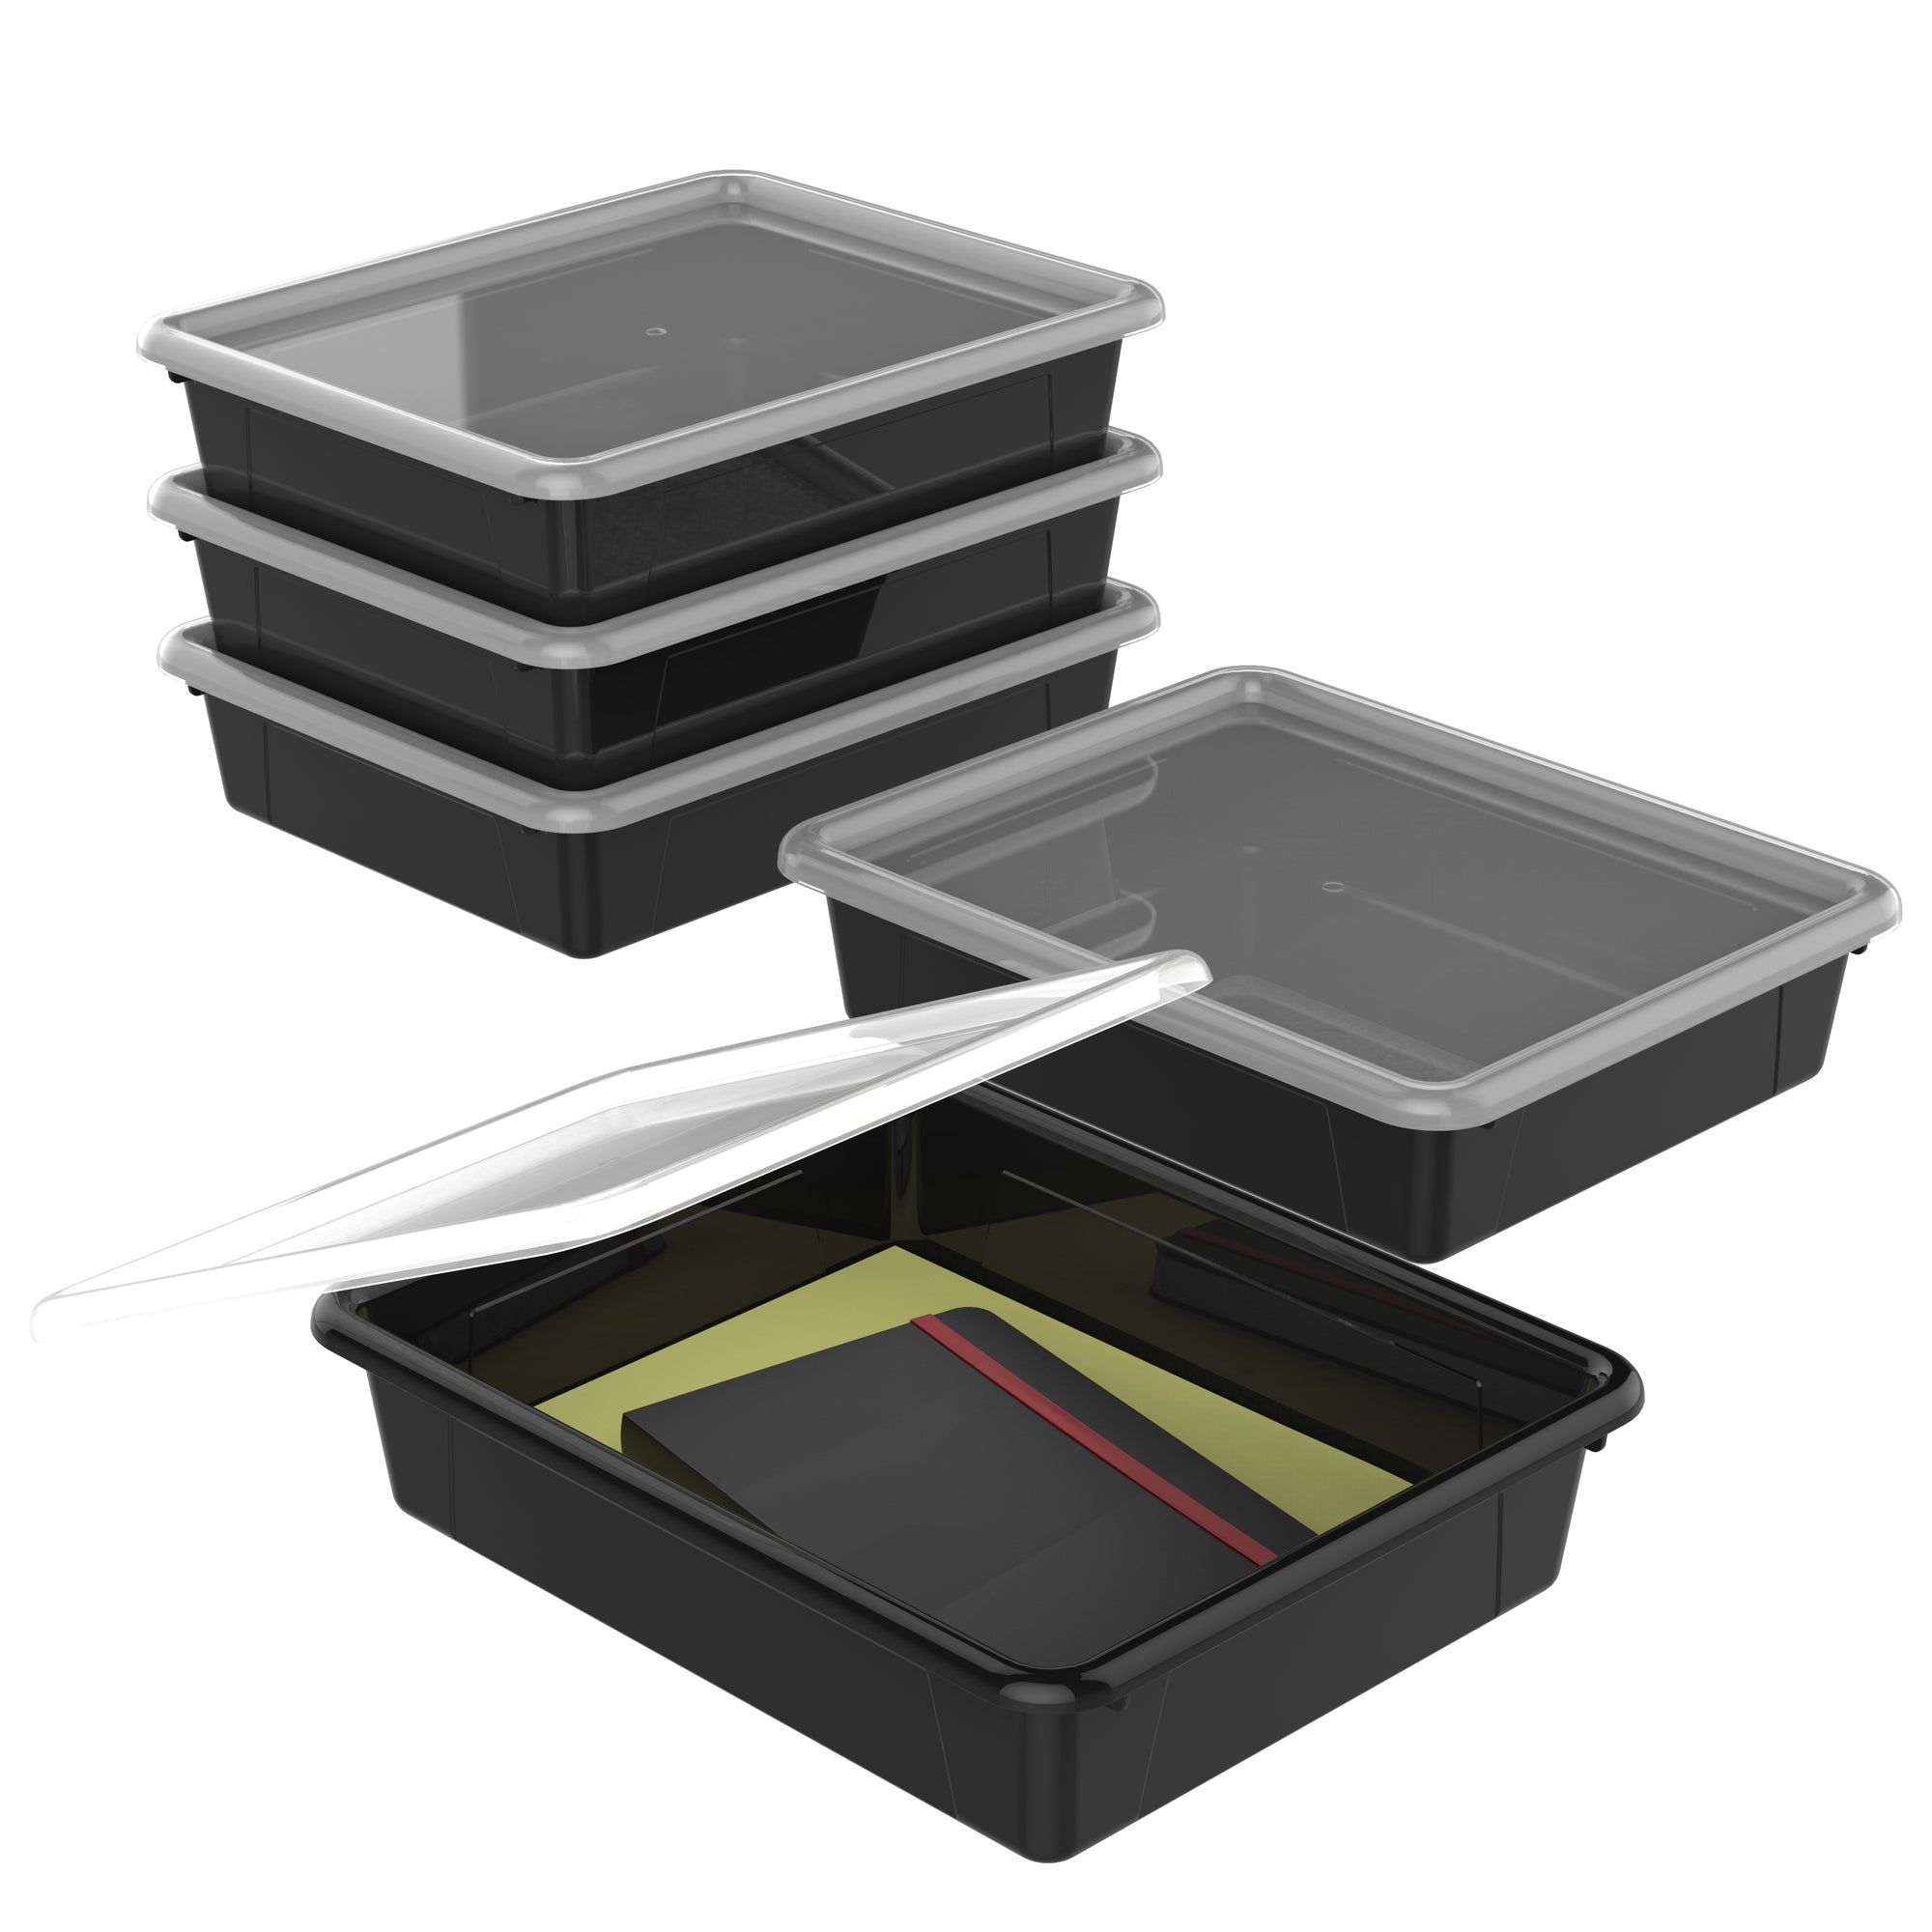 Storex Flat Storage Tray with Lid, Letter Size, 10 x 13 x 3 Inches, Black, 5-Pack